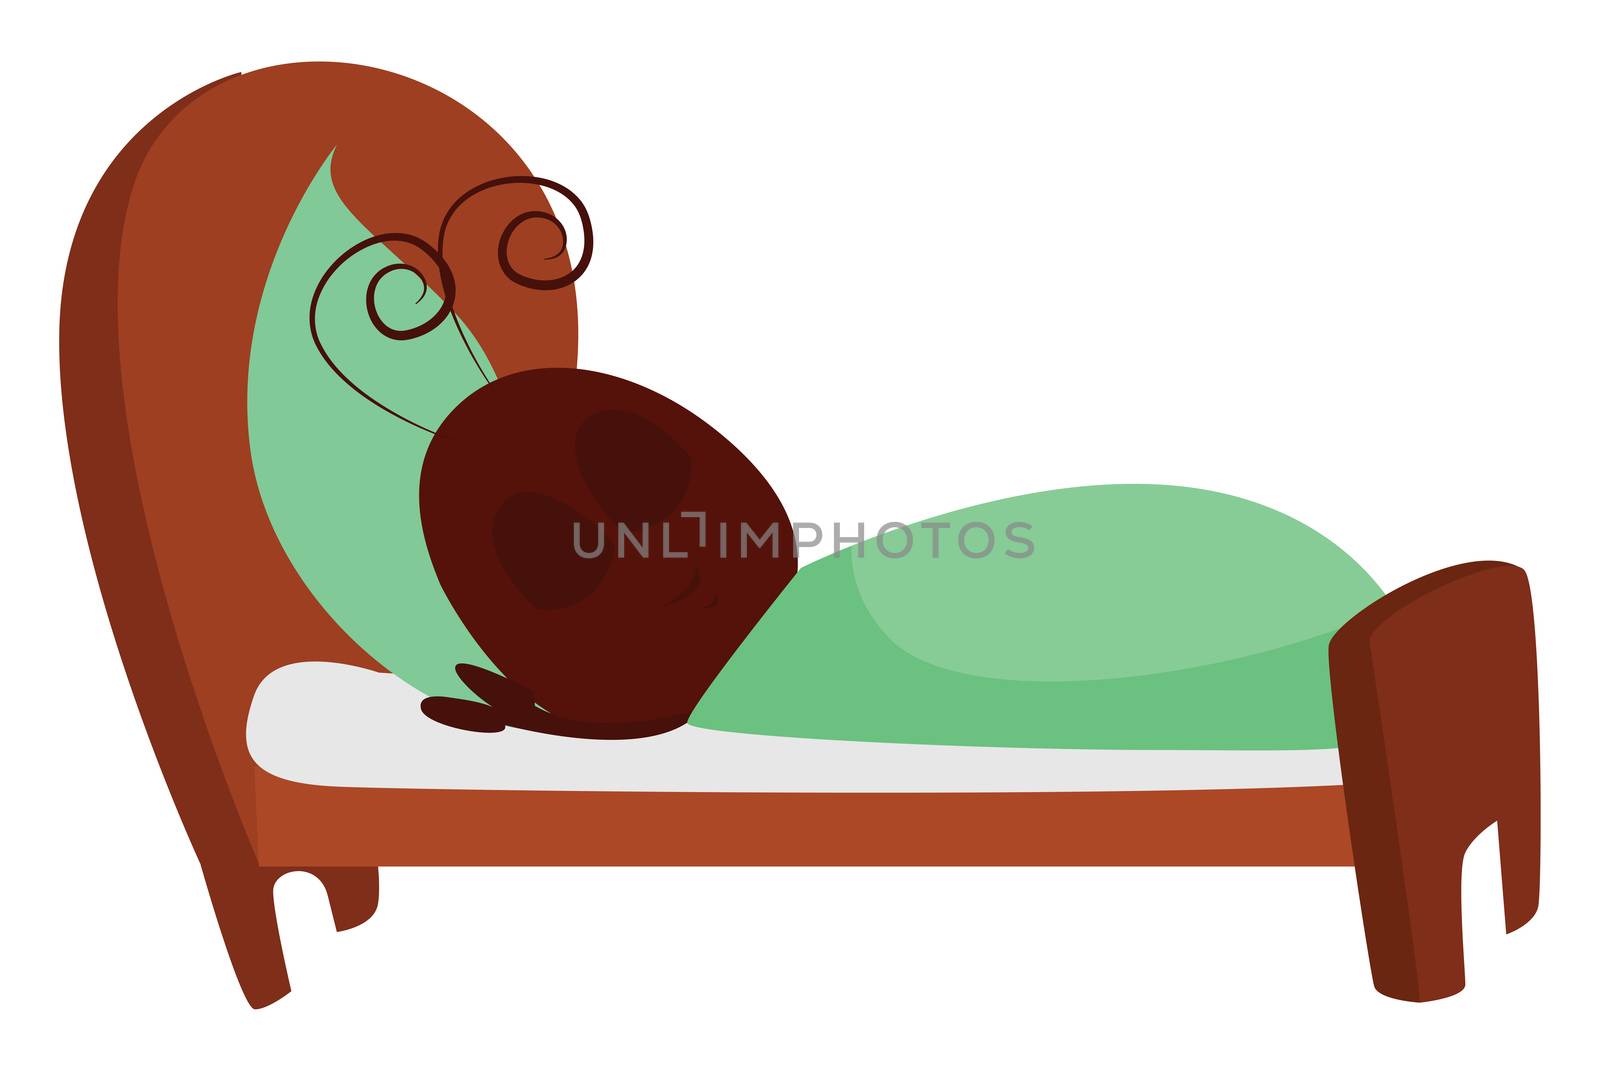 Sleeping ant in bed , illustration, vector on white background